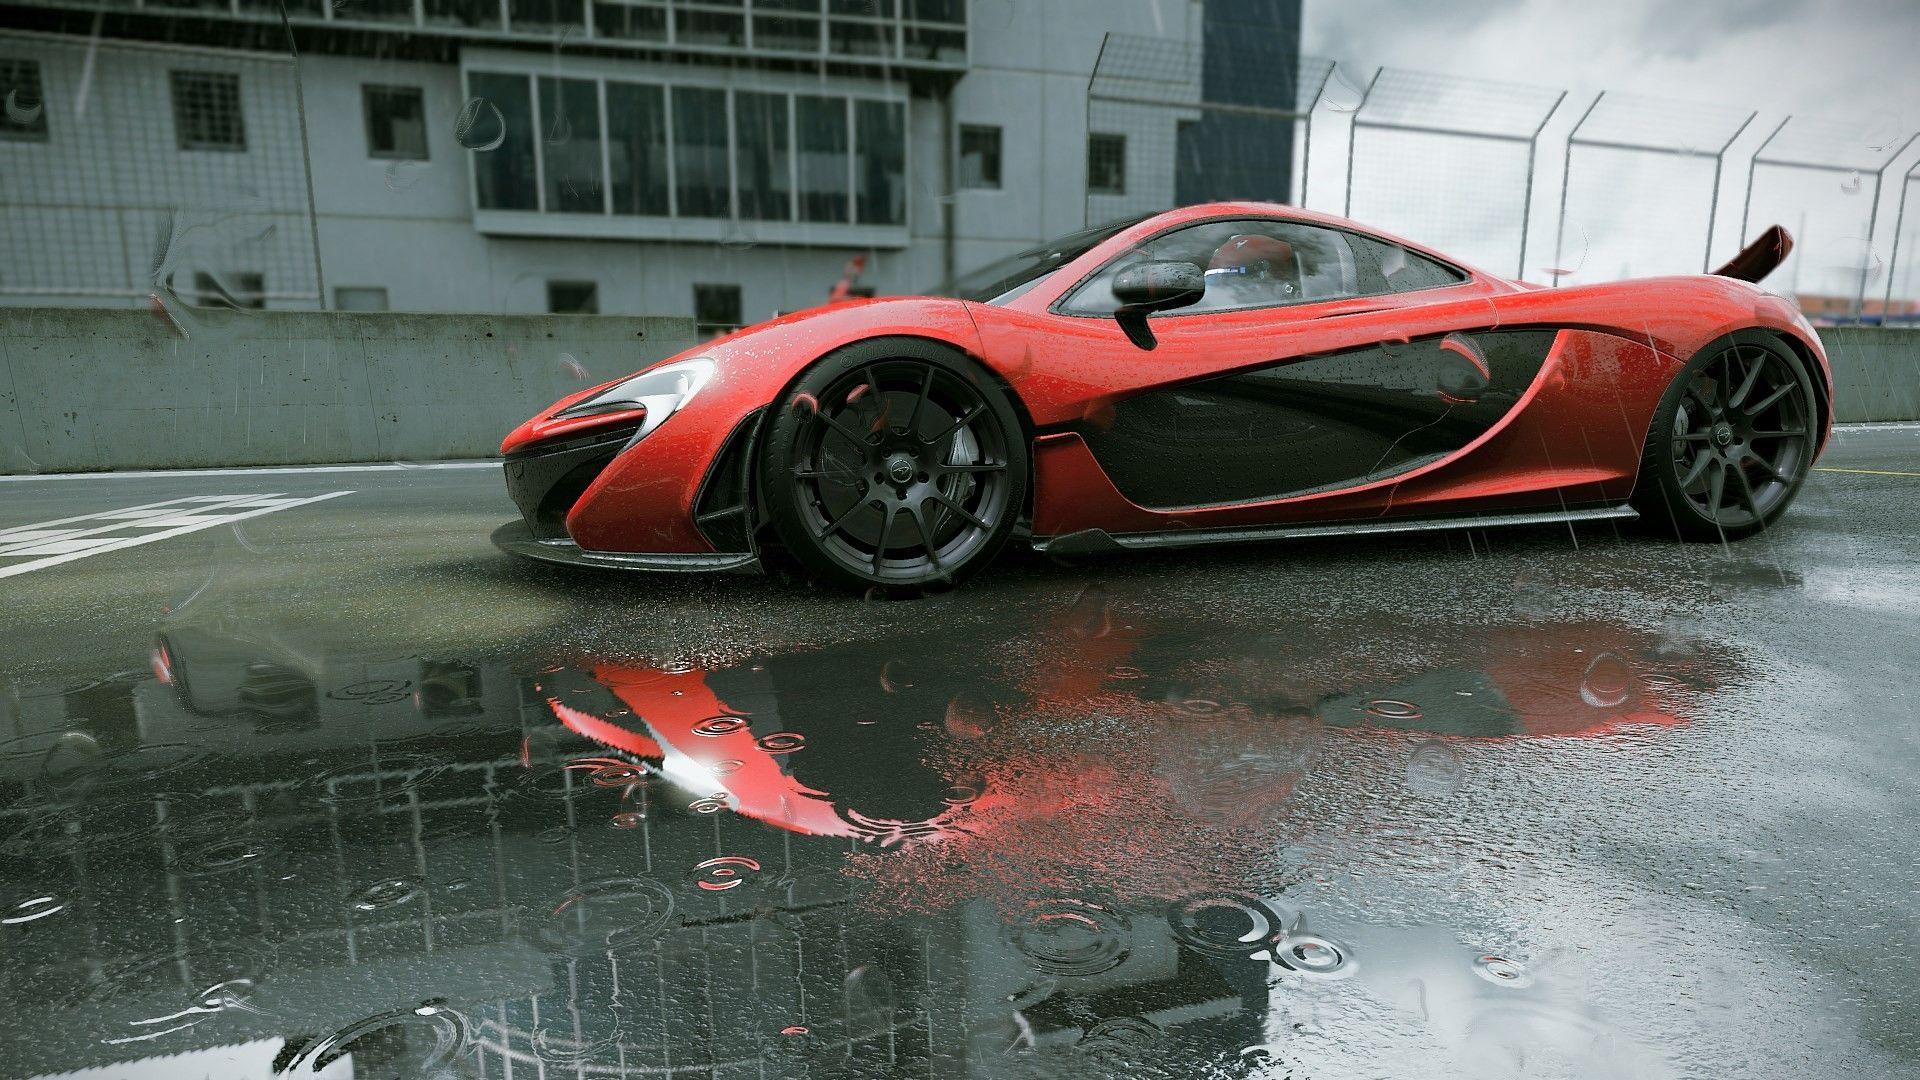 Project Cars Wallpaper 47287 1920x1080 px